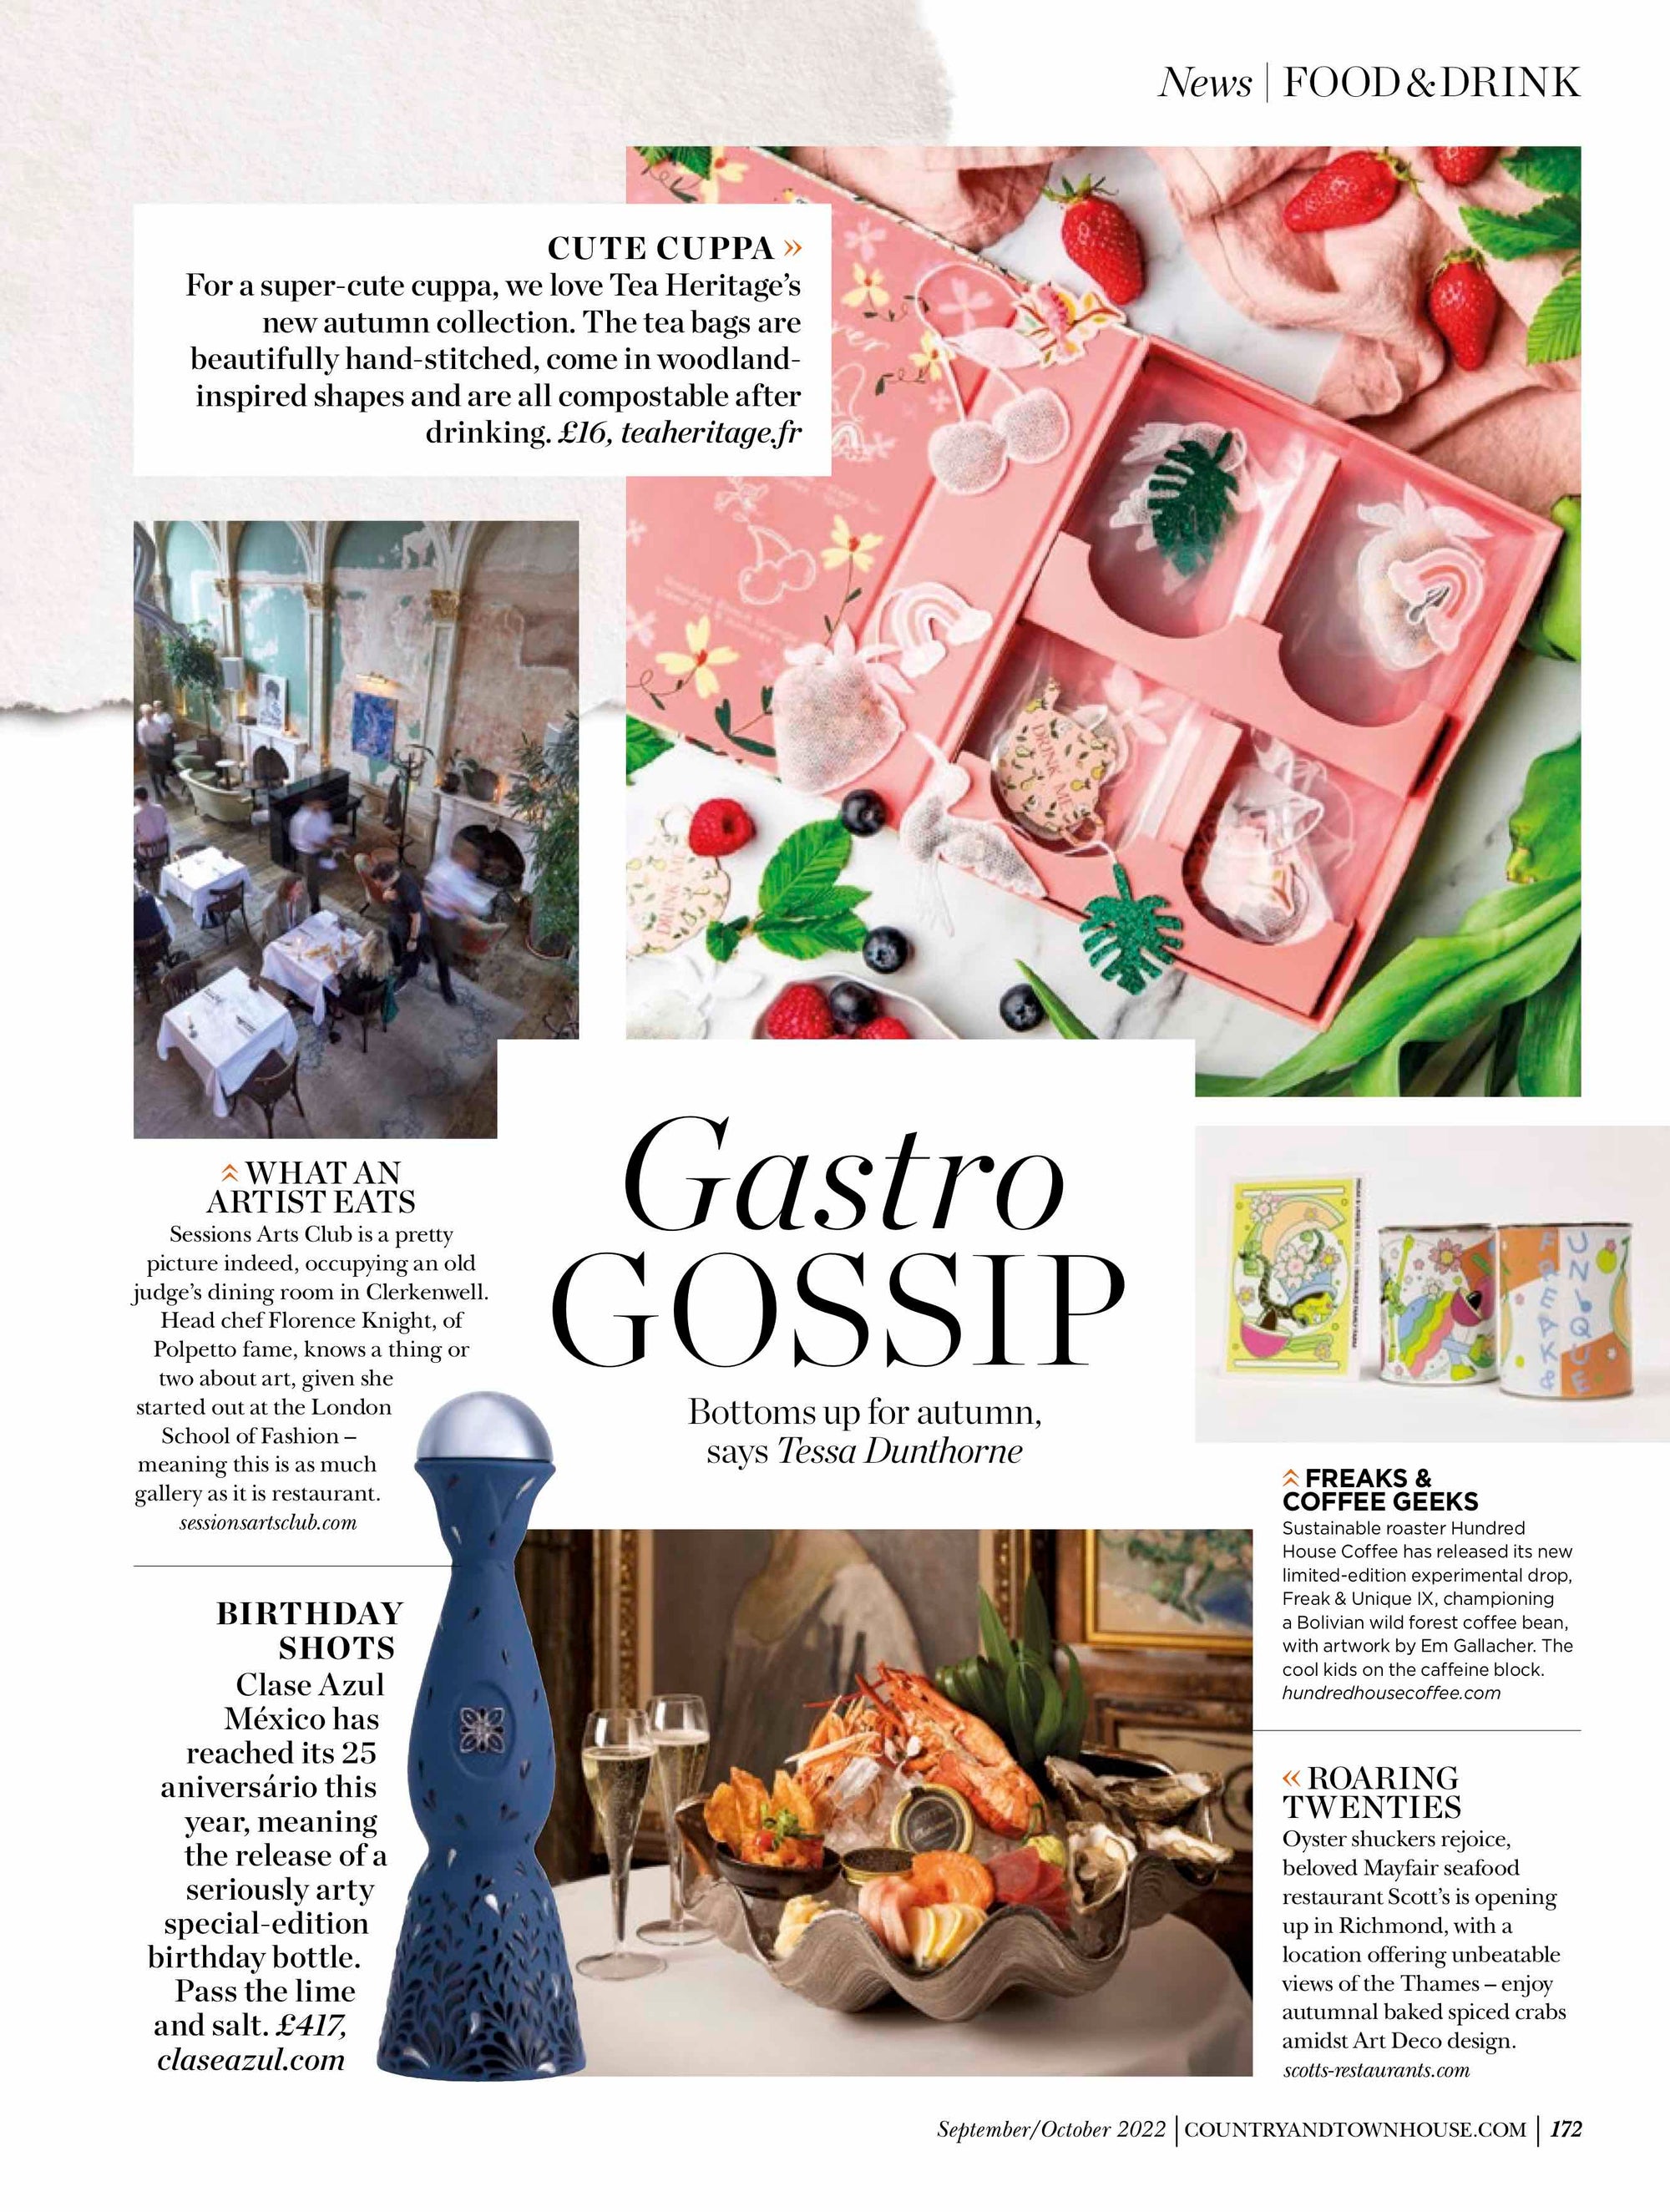 Country & Town House Magazine, Gastro Gossip, September/October 2022